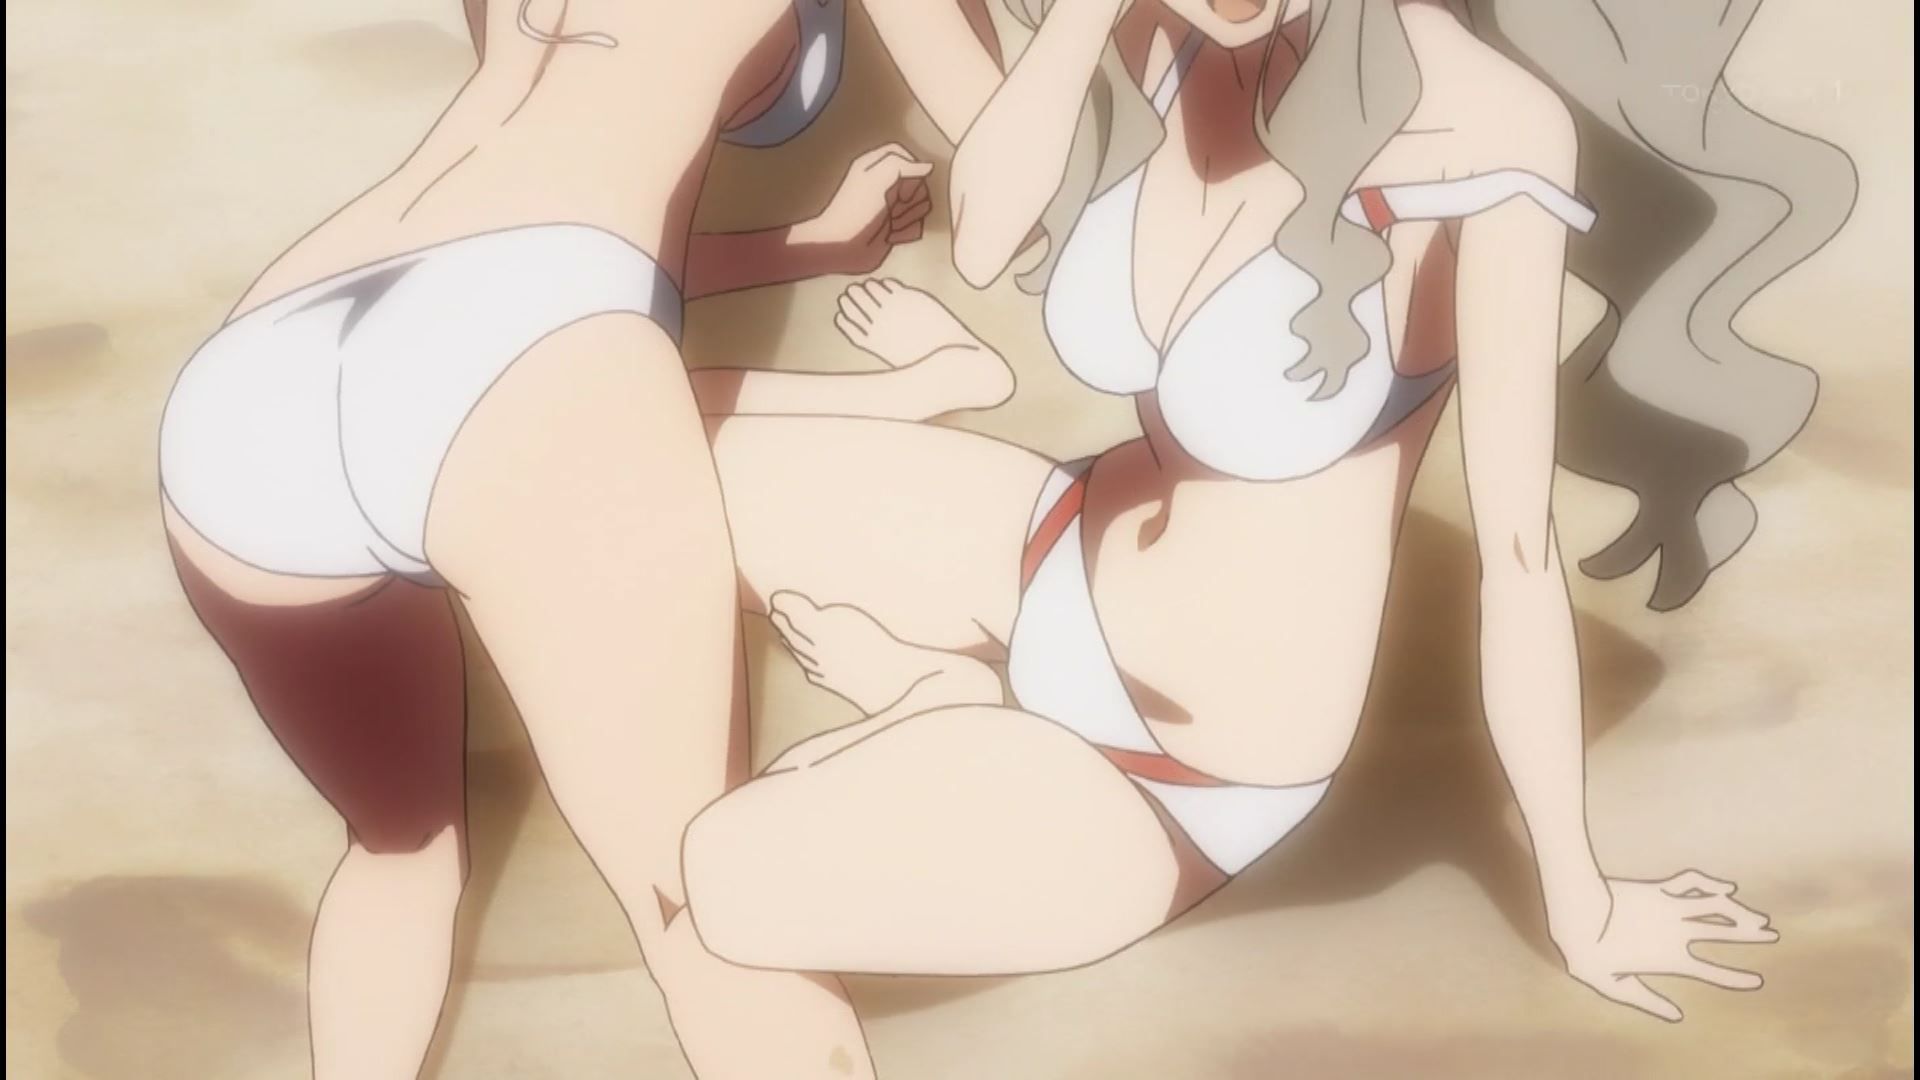 Anime [Darling in the franc kiss] seven girls erotic breasts and buttocks swimsuit times in the story! 8